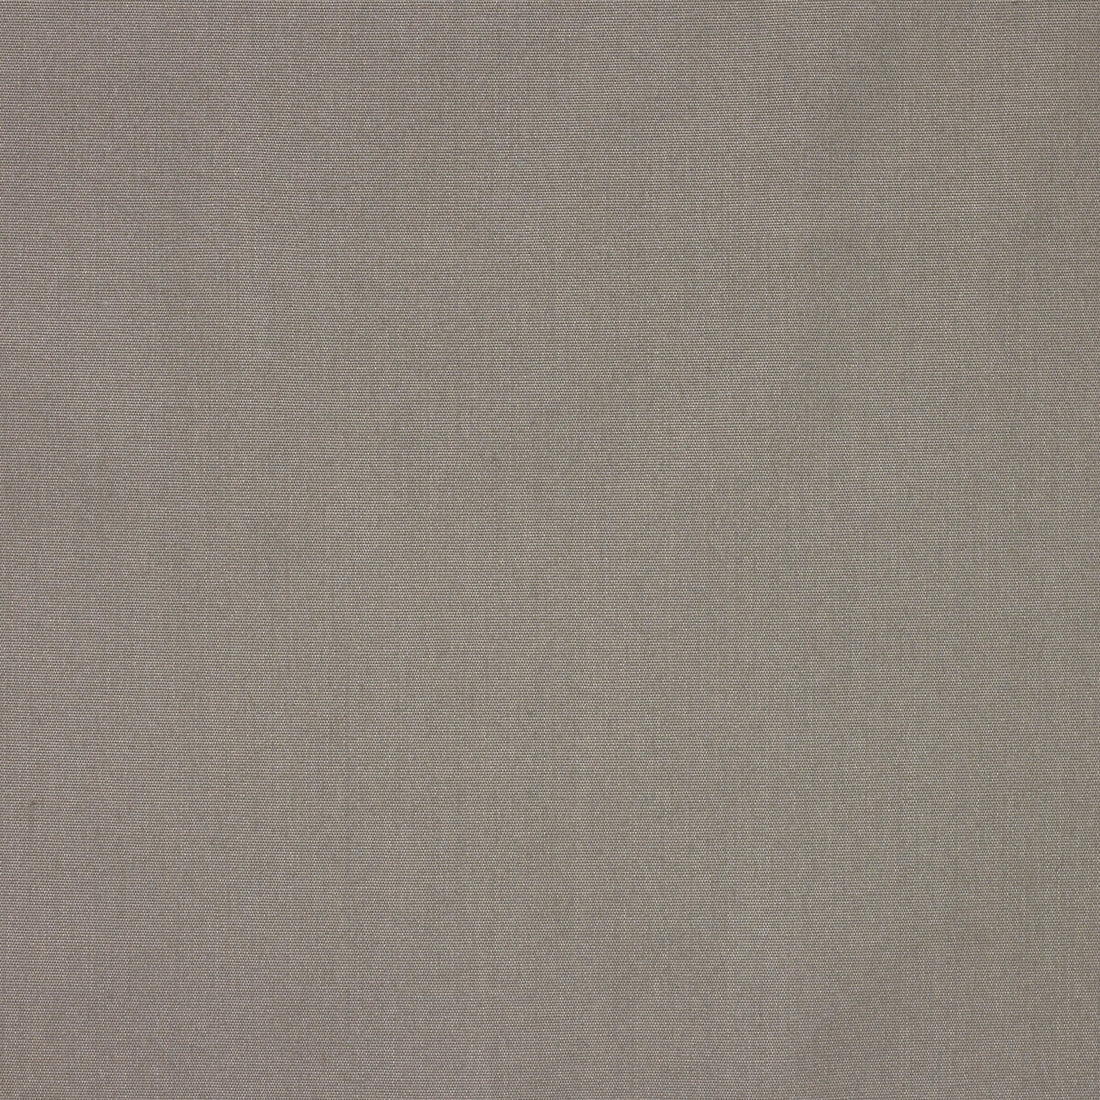 Canvas fabric in taupe color - pattern GR-5461-0000.0.0 - by Kravet Design in the Soleil collection